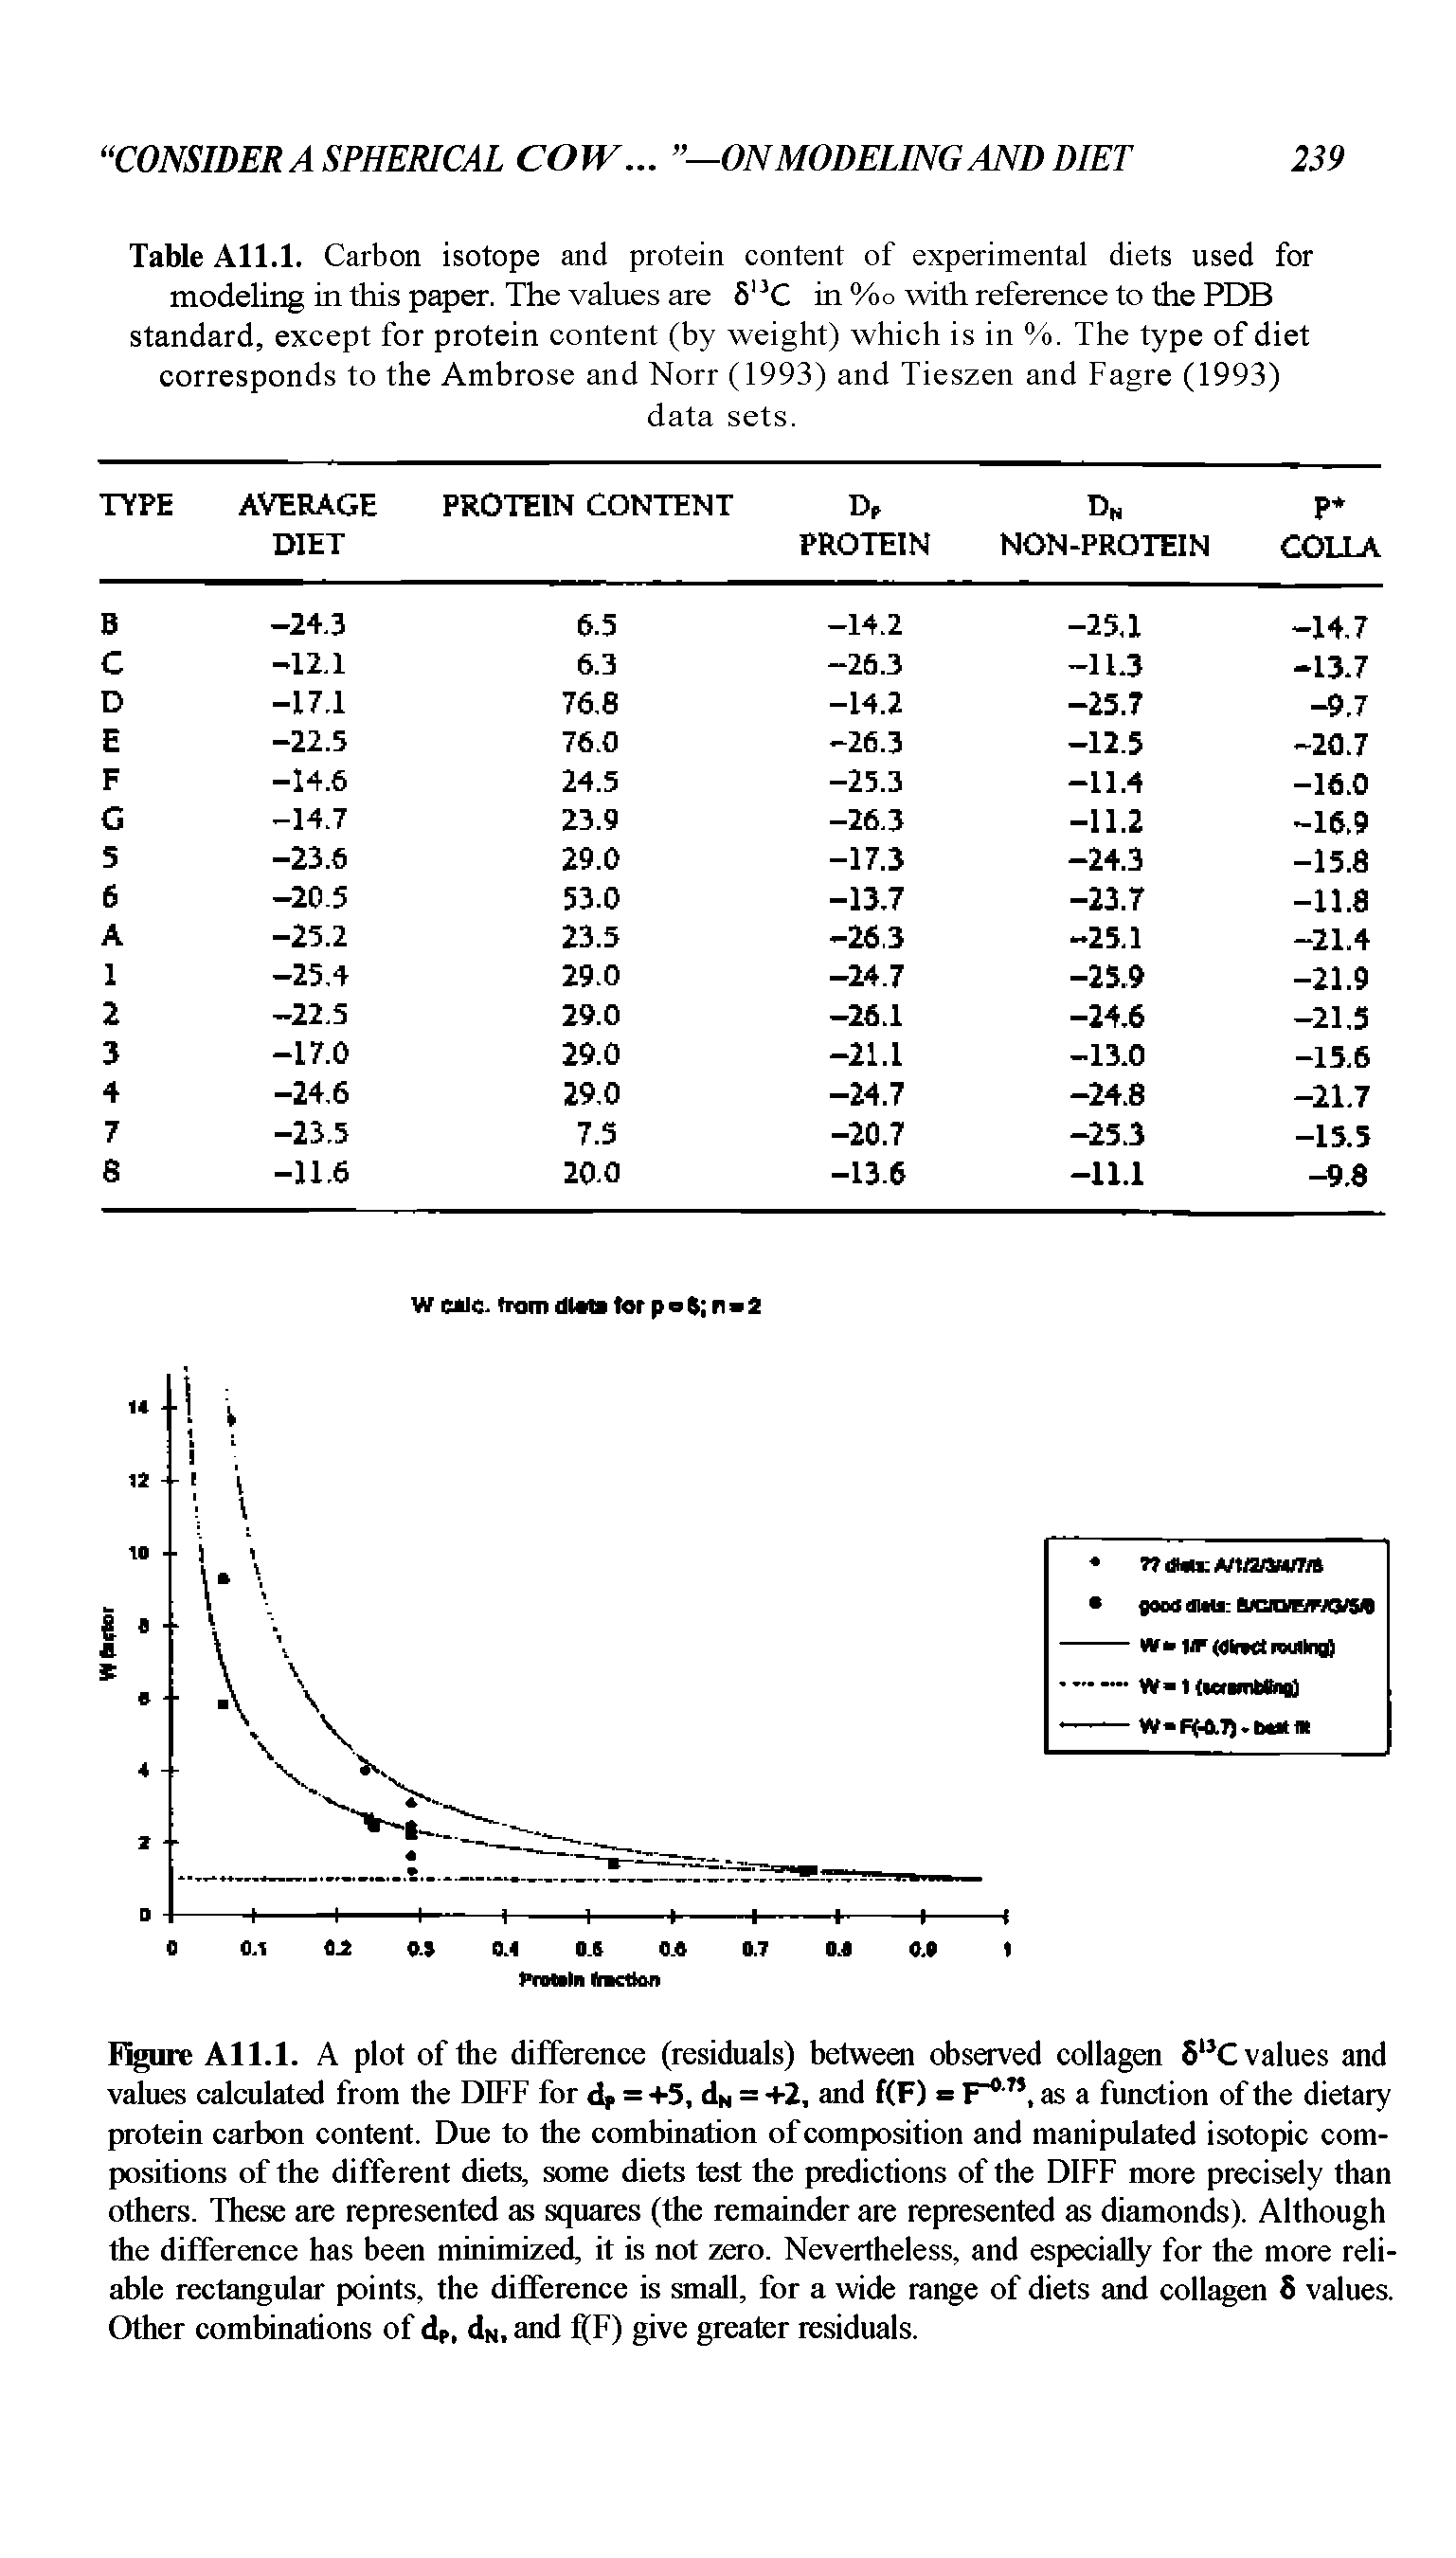 Table All.l. Carbon isotope and protein content of experimental diets used for modeling in this paper. The values are 5 C in %o with reference to the PDB standard, except for protein content (by weight) which is in %. The type of diet corresponds to the Ambrose and Norr (1993) and Tieszen and Fagre (1993)...